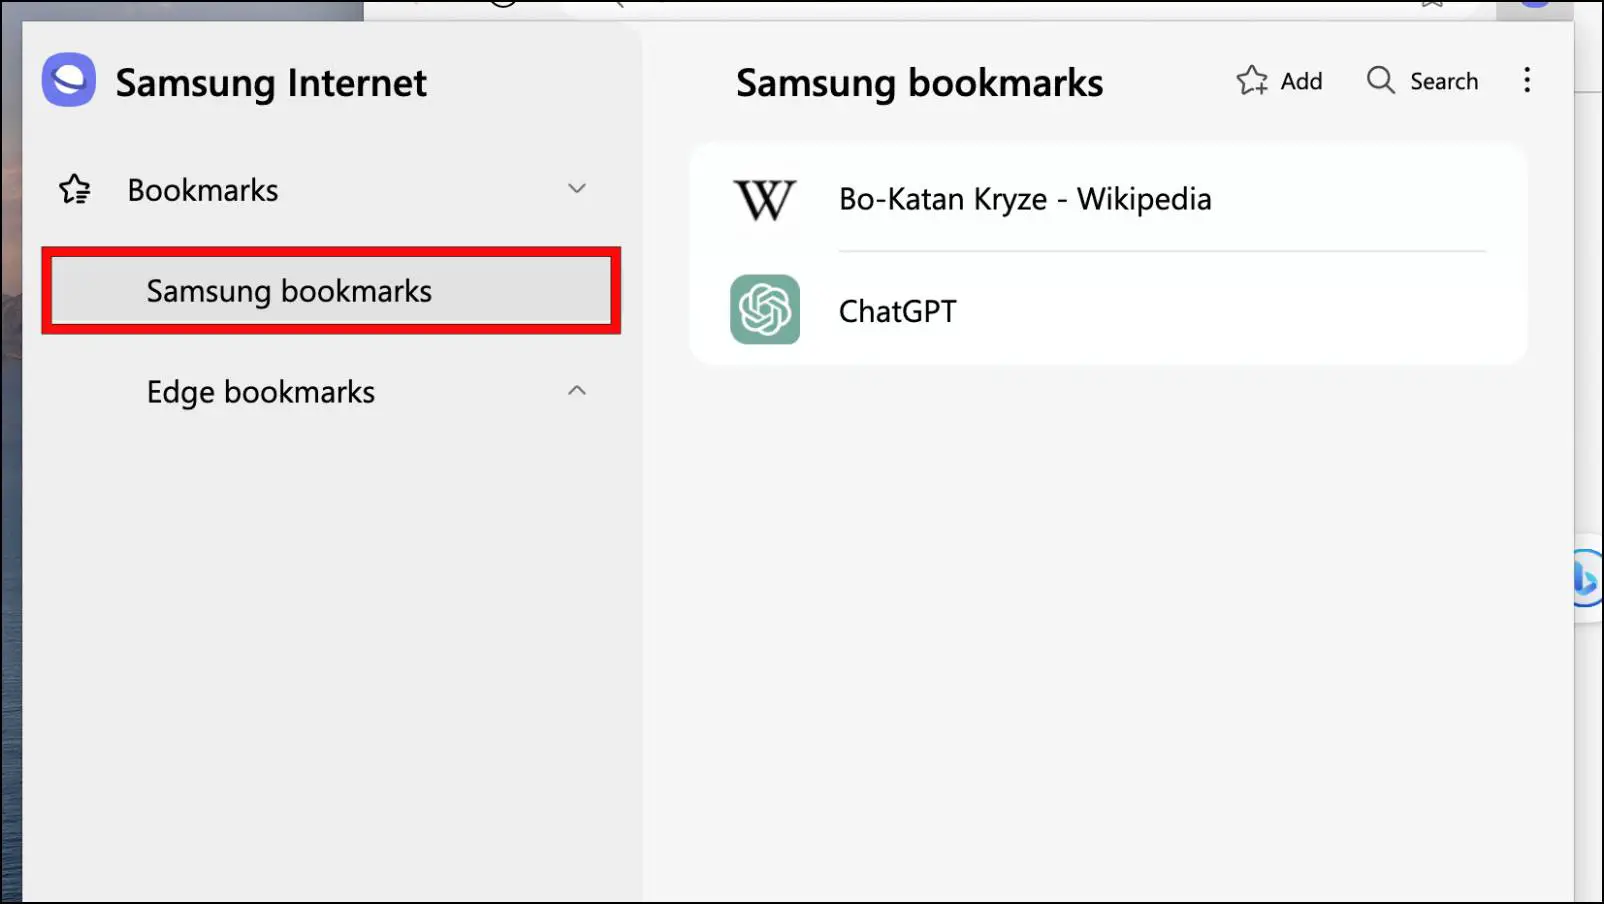 Visit Samsung Bookmarks to View Saved Mobile Bookmarks